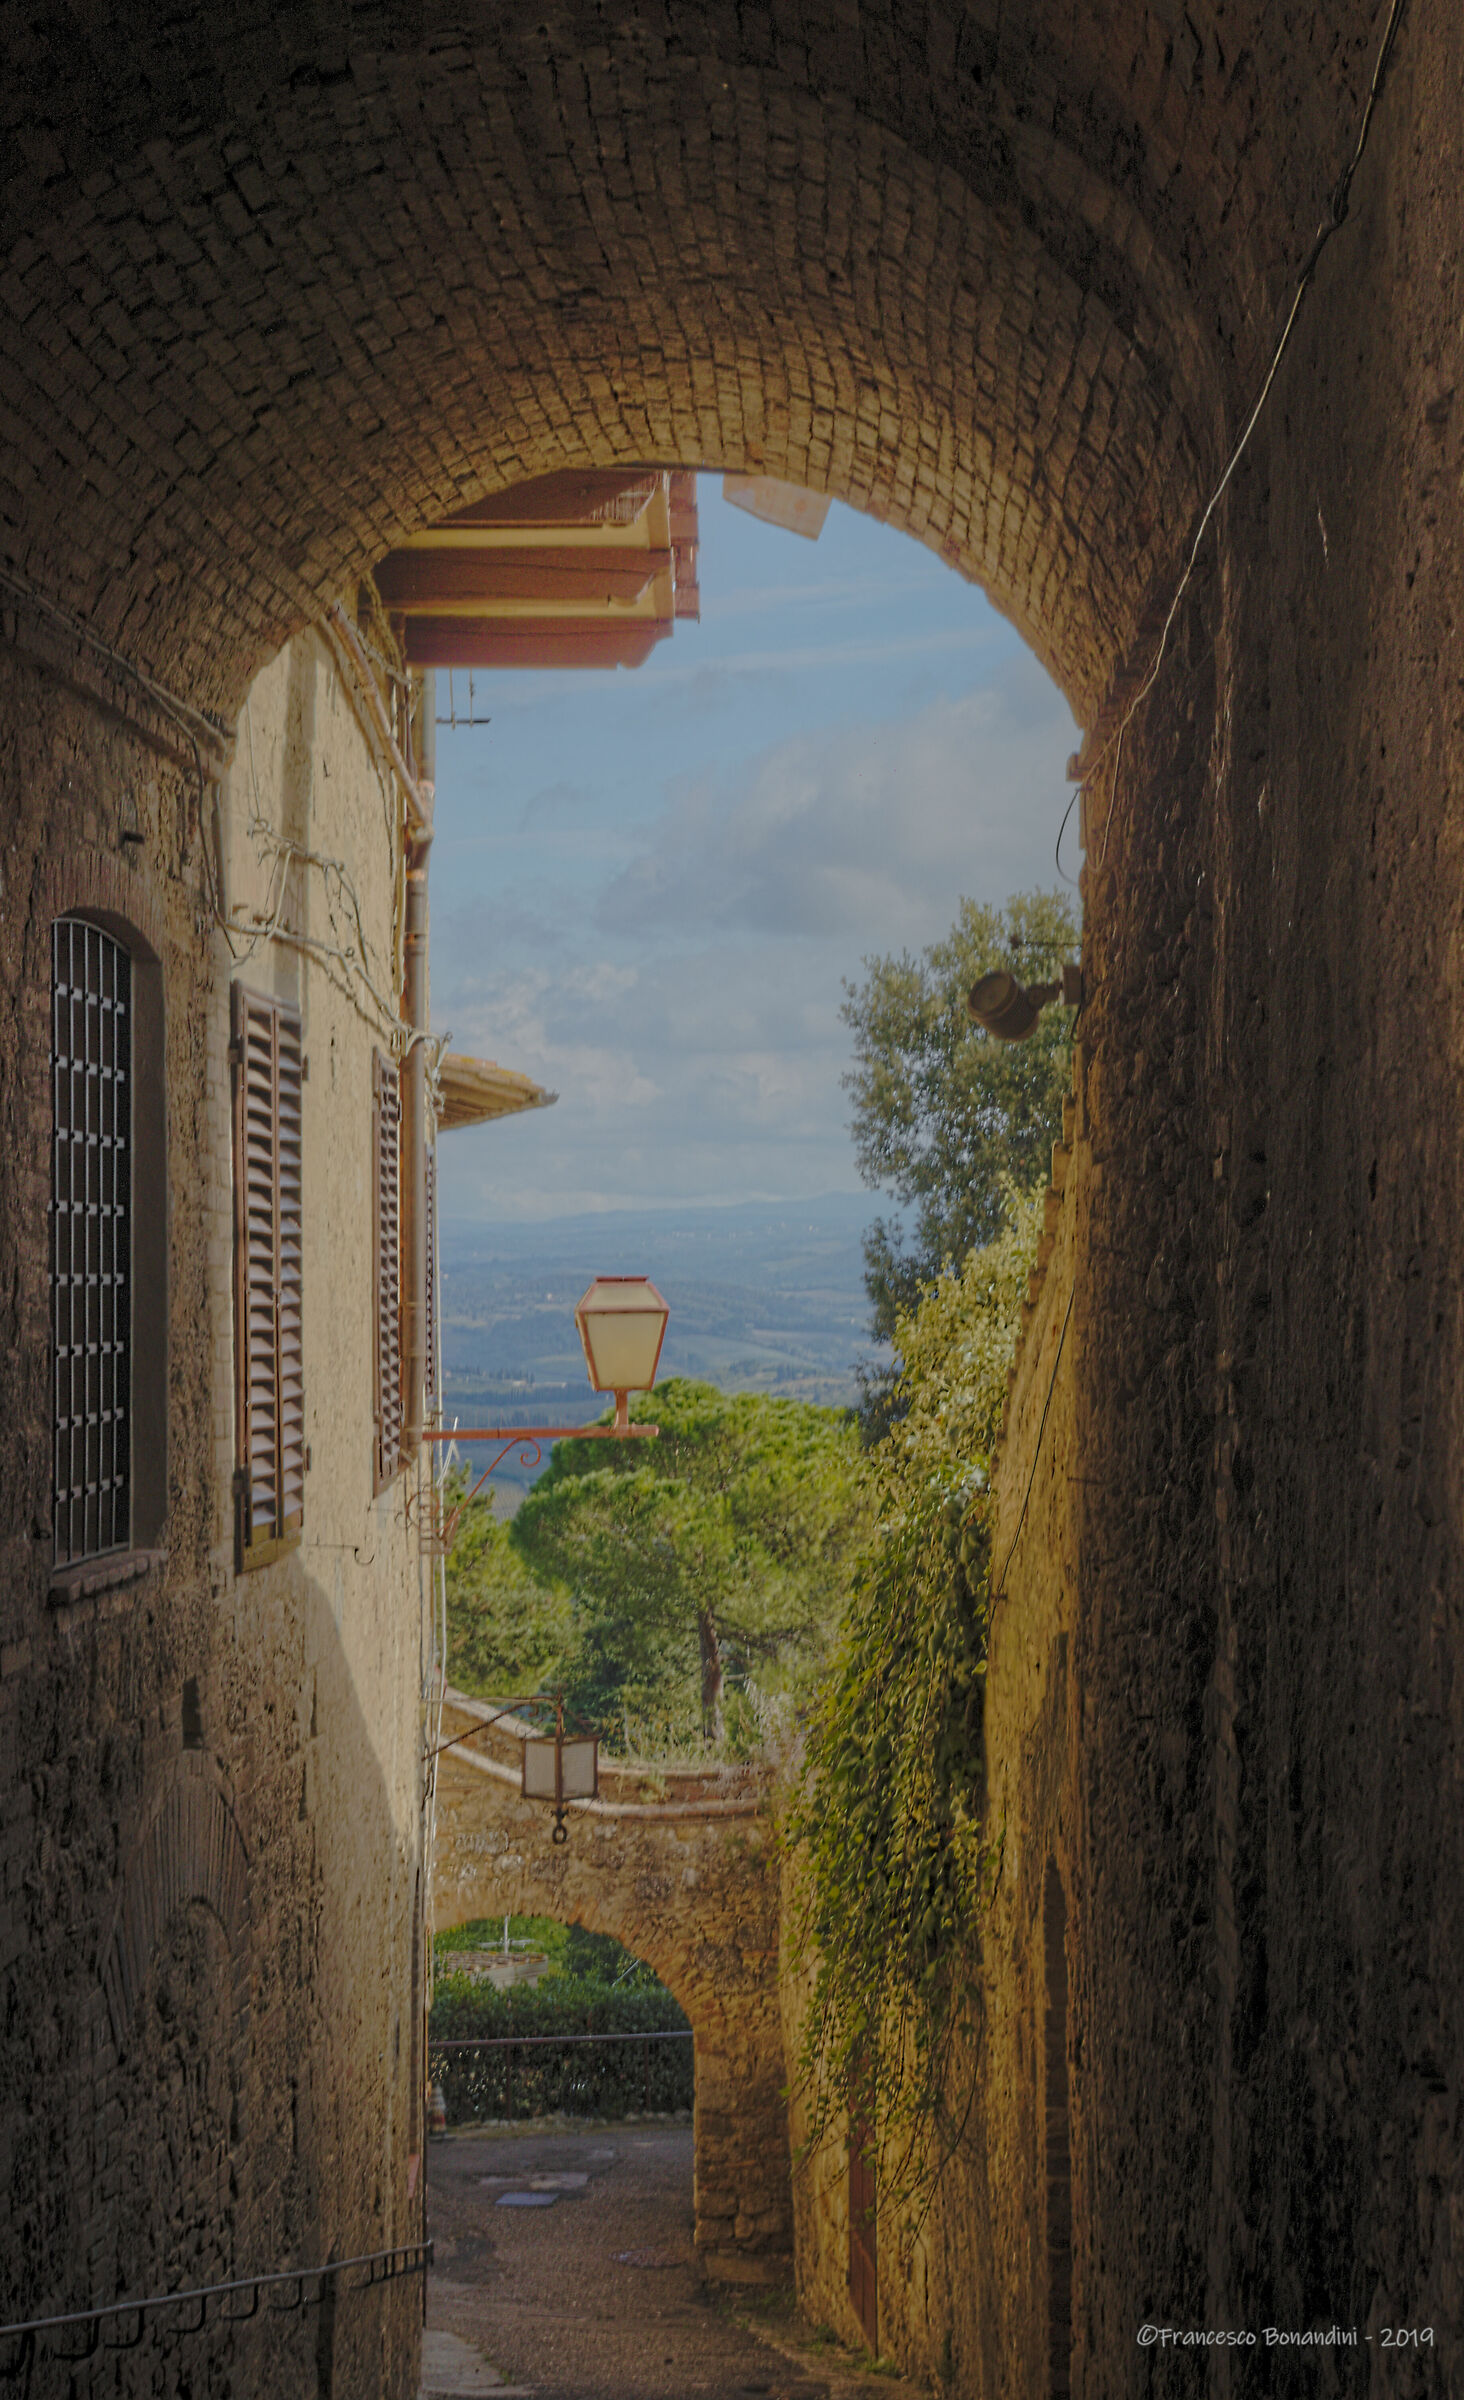 ... Put an alley in Tuscany......